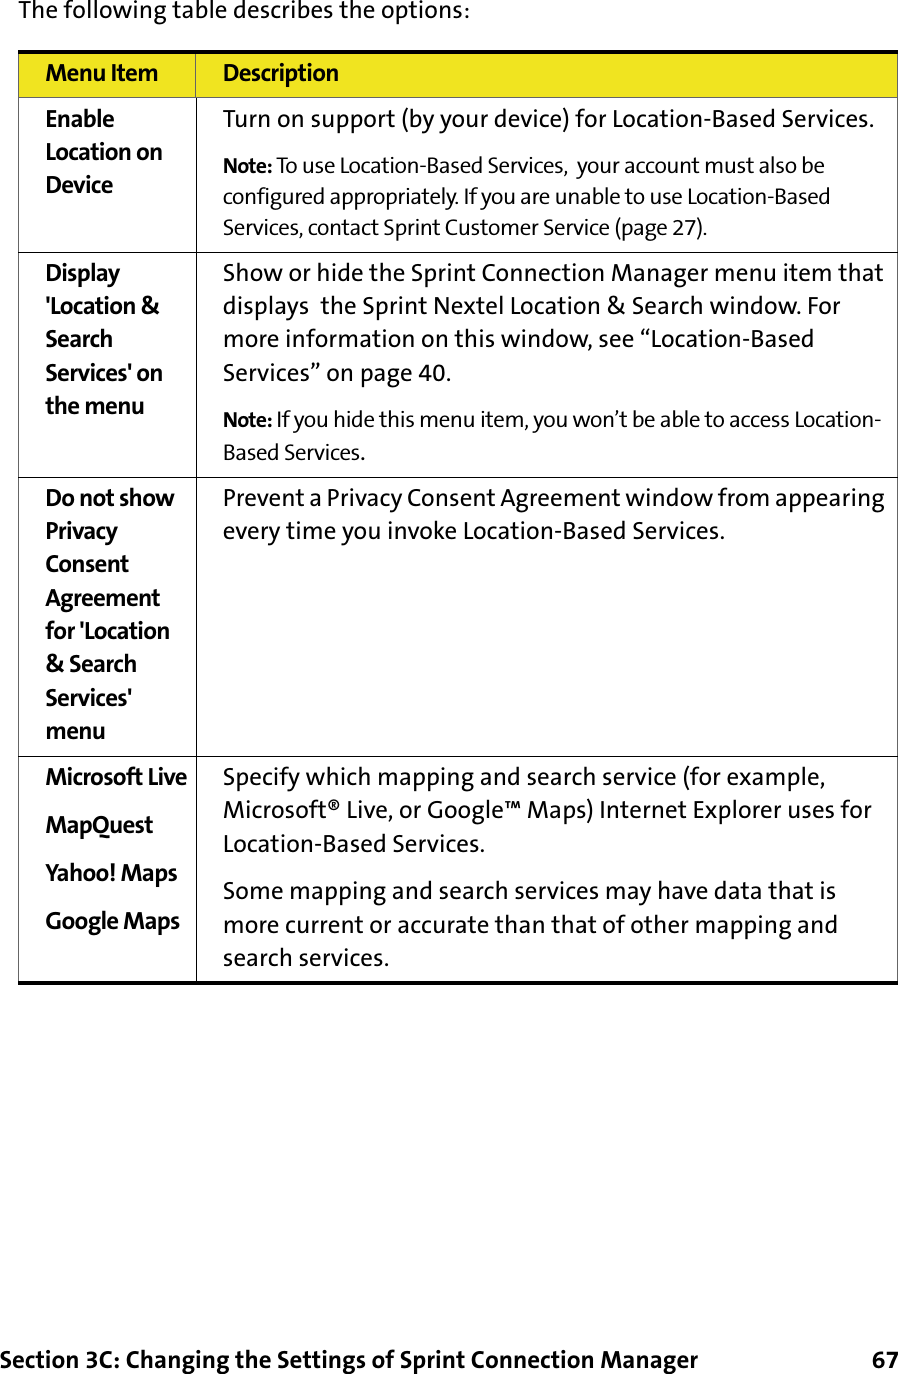 Section 3C: Changing the Settings of Sprint Connection Manager      67The following table describes the options:Menu Item DescriptionEnable Location on DeviceTurn on support (by your device) for Location-Based Services.Note: To use Location-Based Services,  your account must also be configured appropriately. If you are unable to use Location-Based Services, contact Sprint Customer Service (page 27).Display &apos;Location &amp; Search Services&apos; on the menuShow or hide the Sprint Connection Manager menu item that displays  the Sprint Nextel Location &amp; Search window. For more information on this window, see “Location-Based Services” on page 40.Note: If you hide this menu item, you won’t be able to access Location-Based Services.Do not show Privacy Consent Agreement for &apos;Location &amp; Search Services&apos; menuPrevent a Privacy Consent Agreement window from appearing every time you invoke Location-Based Services.Microsoft LiveMapQuestYahoo! MapsGoogle MapsSpecify which mapping and search service (for example, Microsoft® Live, or Google™ Maps) Internet Explorer uses for Location-Based Services.Some mapping and search services may have data that is more current or accurate than that of other mapping and search services.